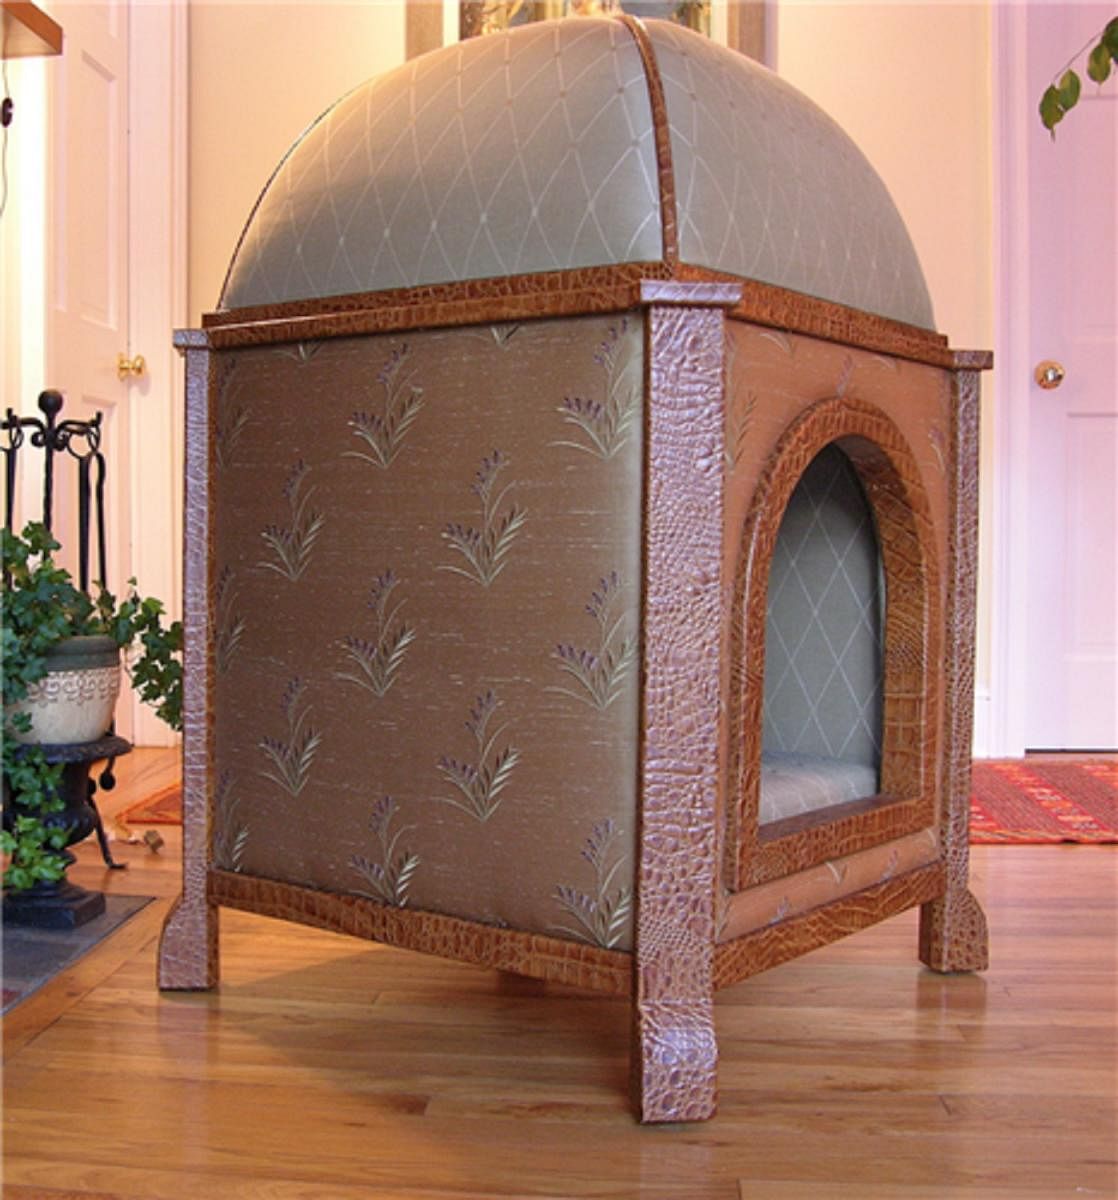 Dome shaped dog bed. Credit: DH Photo